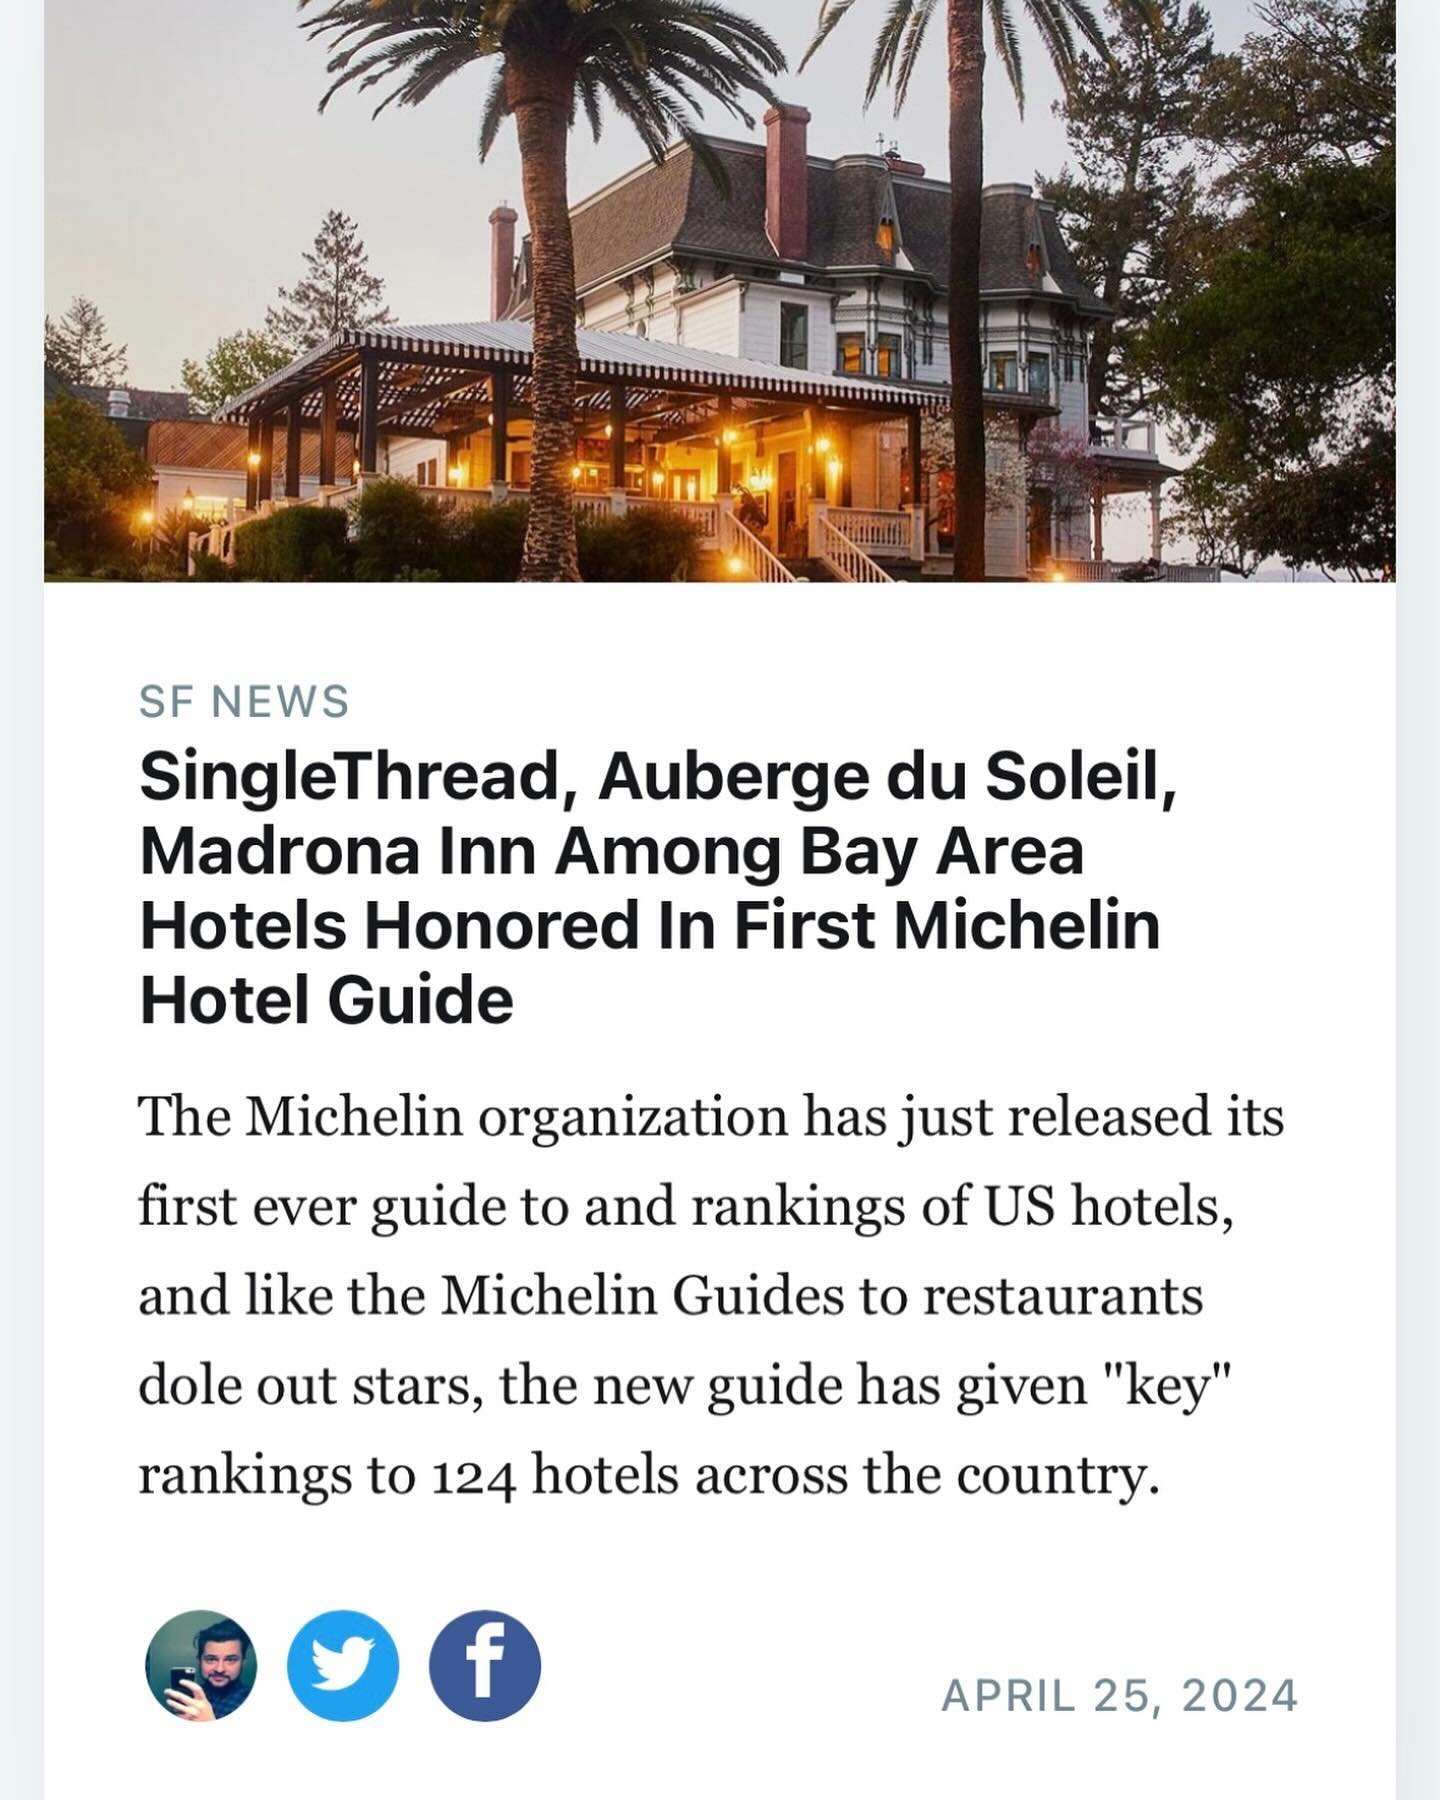 Proud to have a Redwood Builders project, @themadrona win a prestigious hospitality award - two keys from the Michelin Hotel Guide. The property is gorgeous and worth a visit for cocktails and dinner or for an indulgent weekend. The Madrona joins the